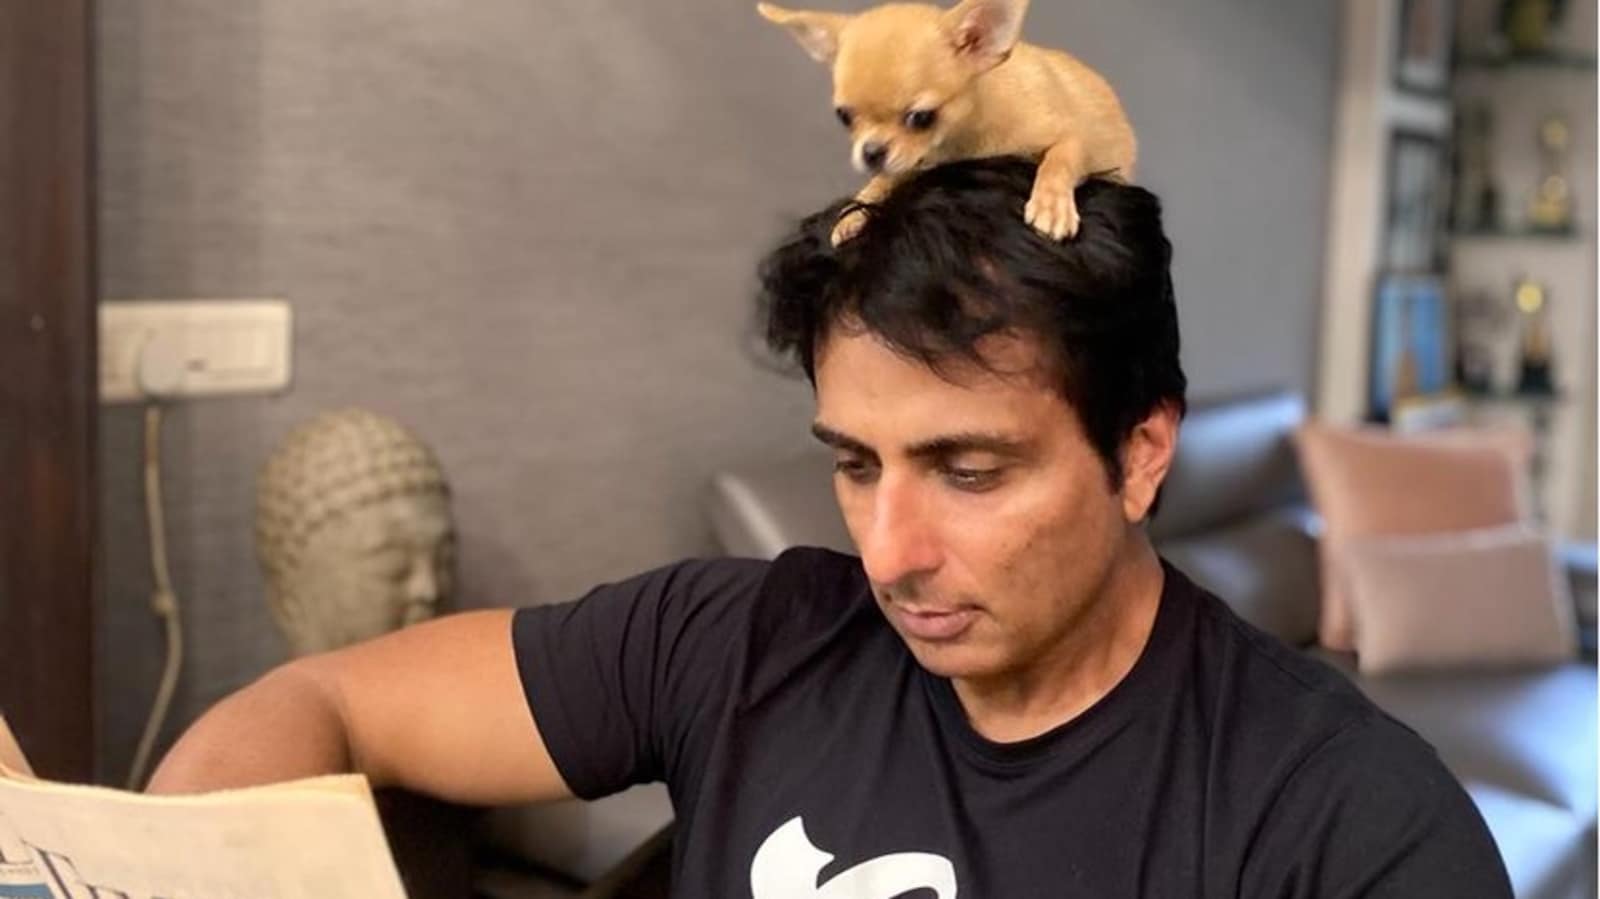 Sonu Sood shares his newspaper with adorable dog resting on his head, fans cannot handle the cute pic